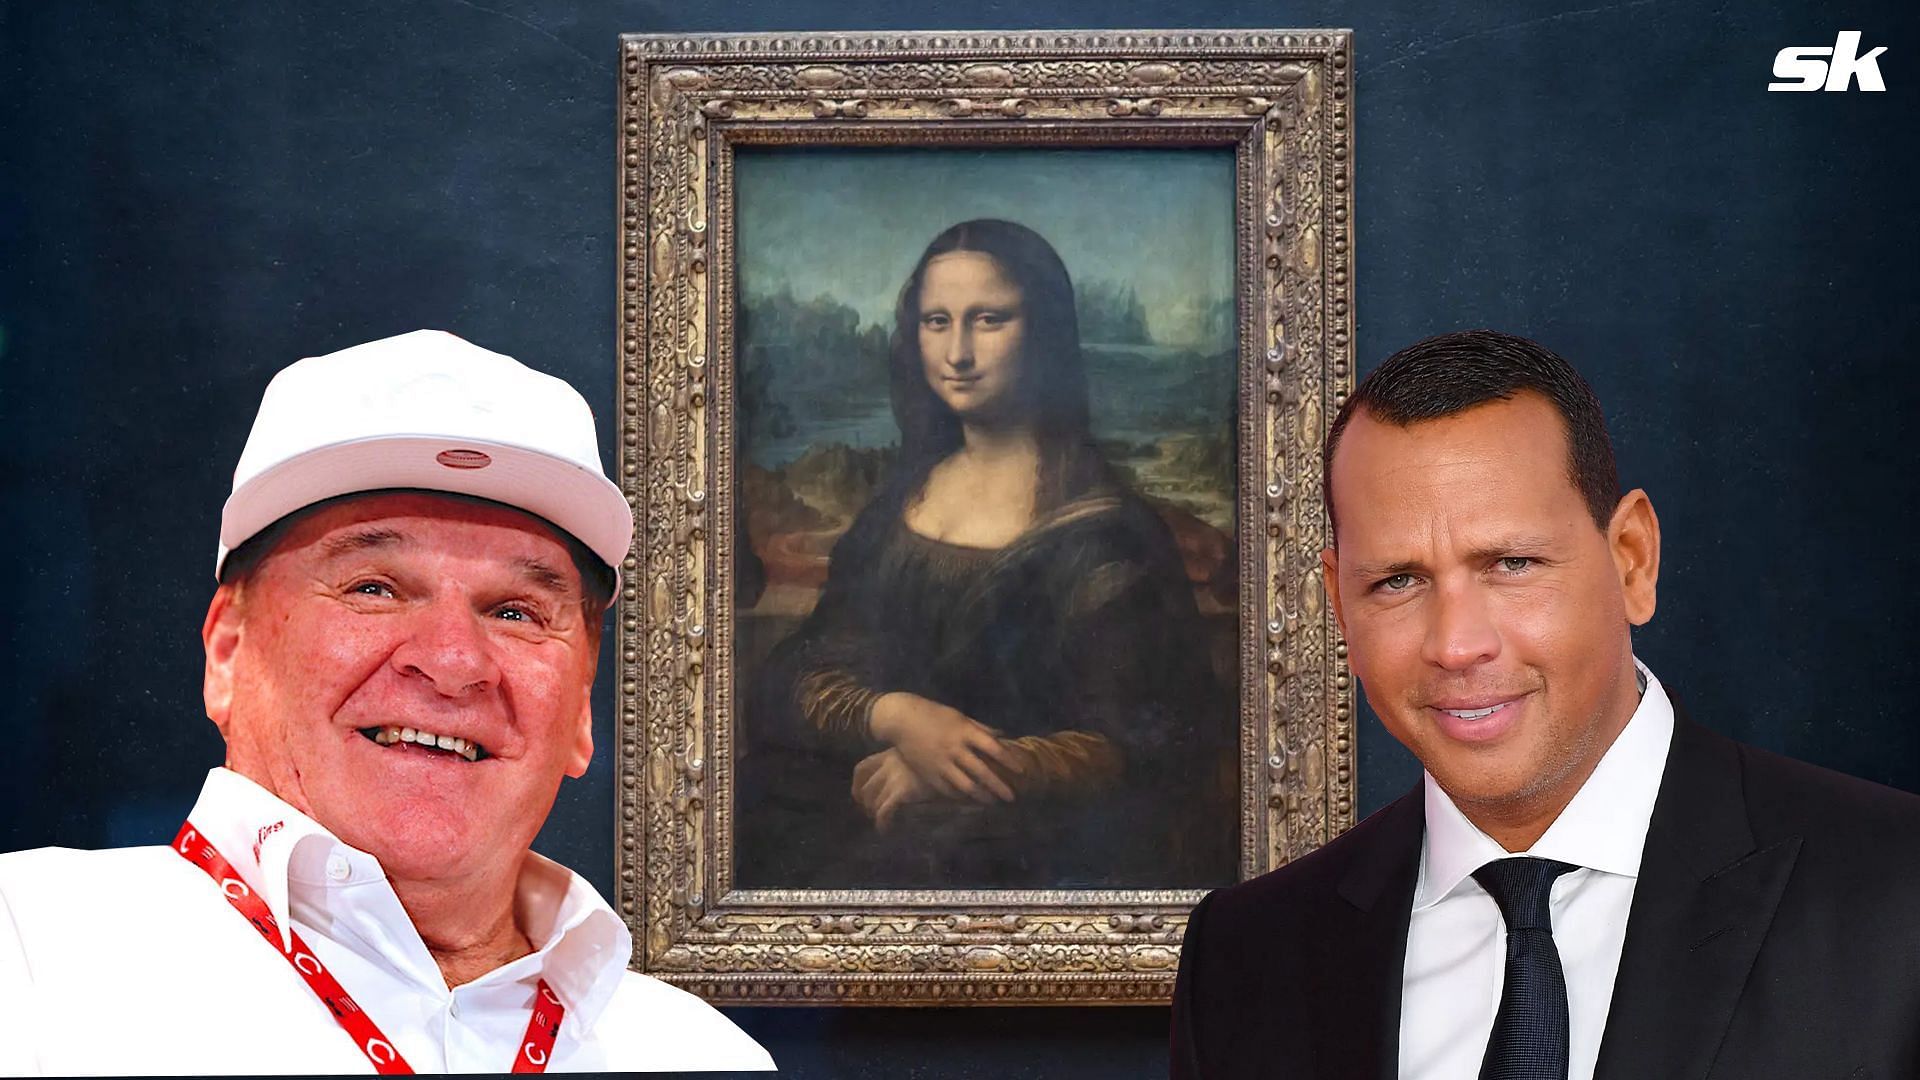 Alex Rodriguez comparing Pete Rose to the great artists